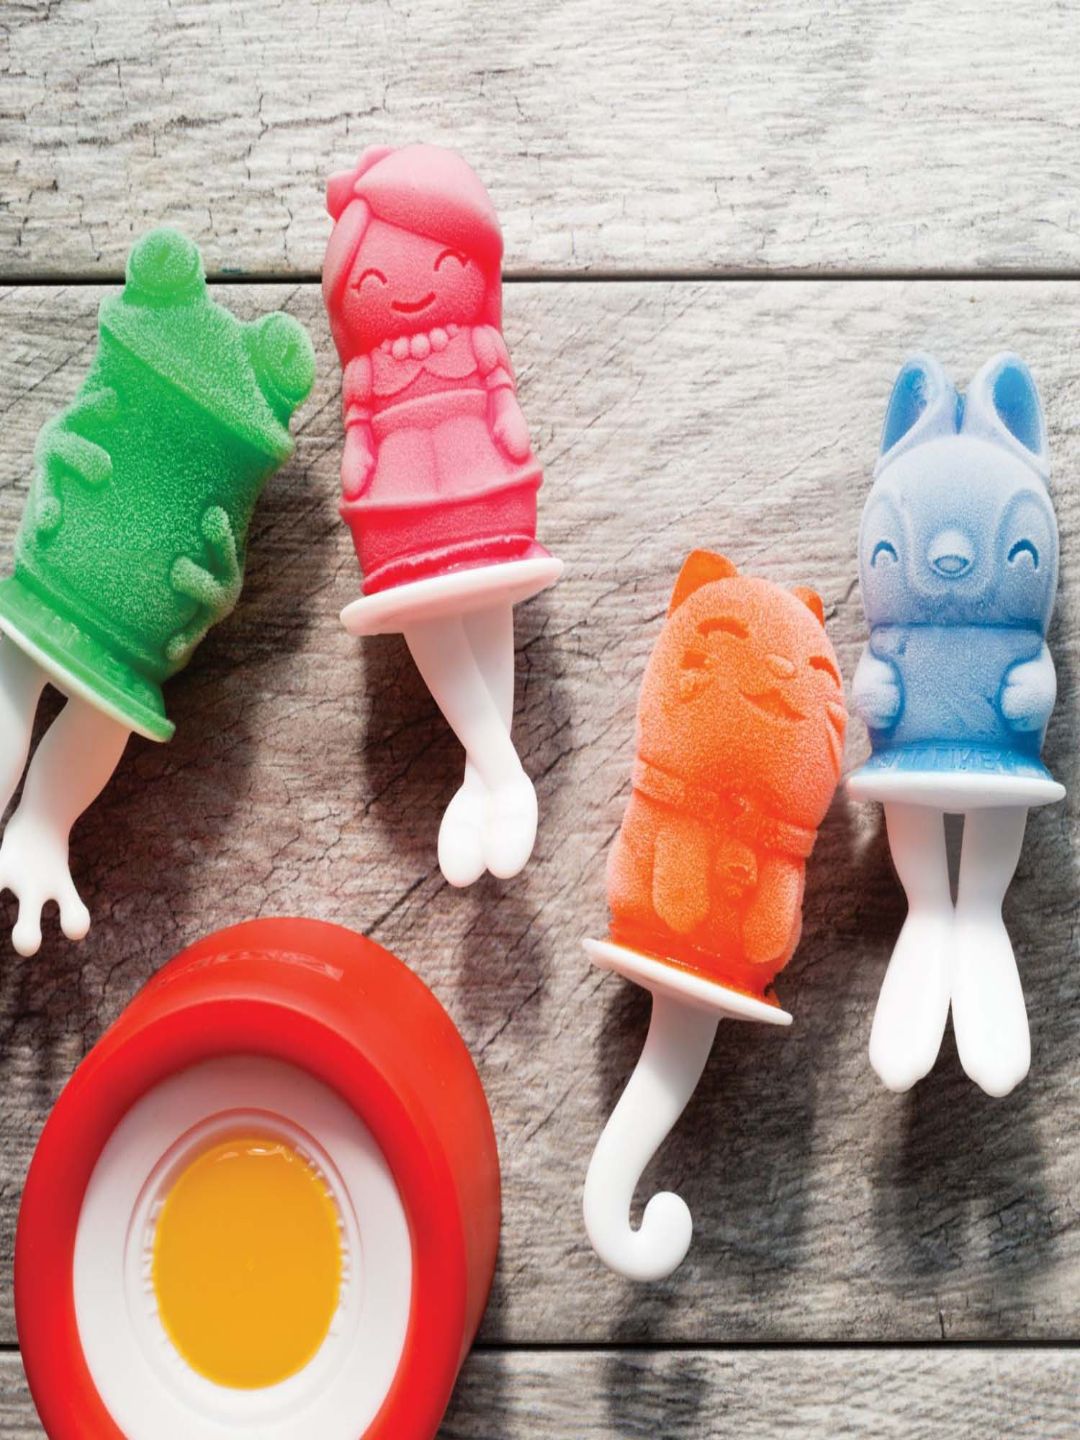 ZOKU Green Ice Pop Mold Price in India